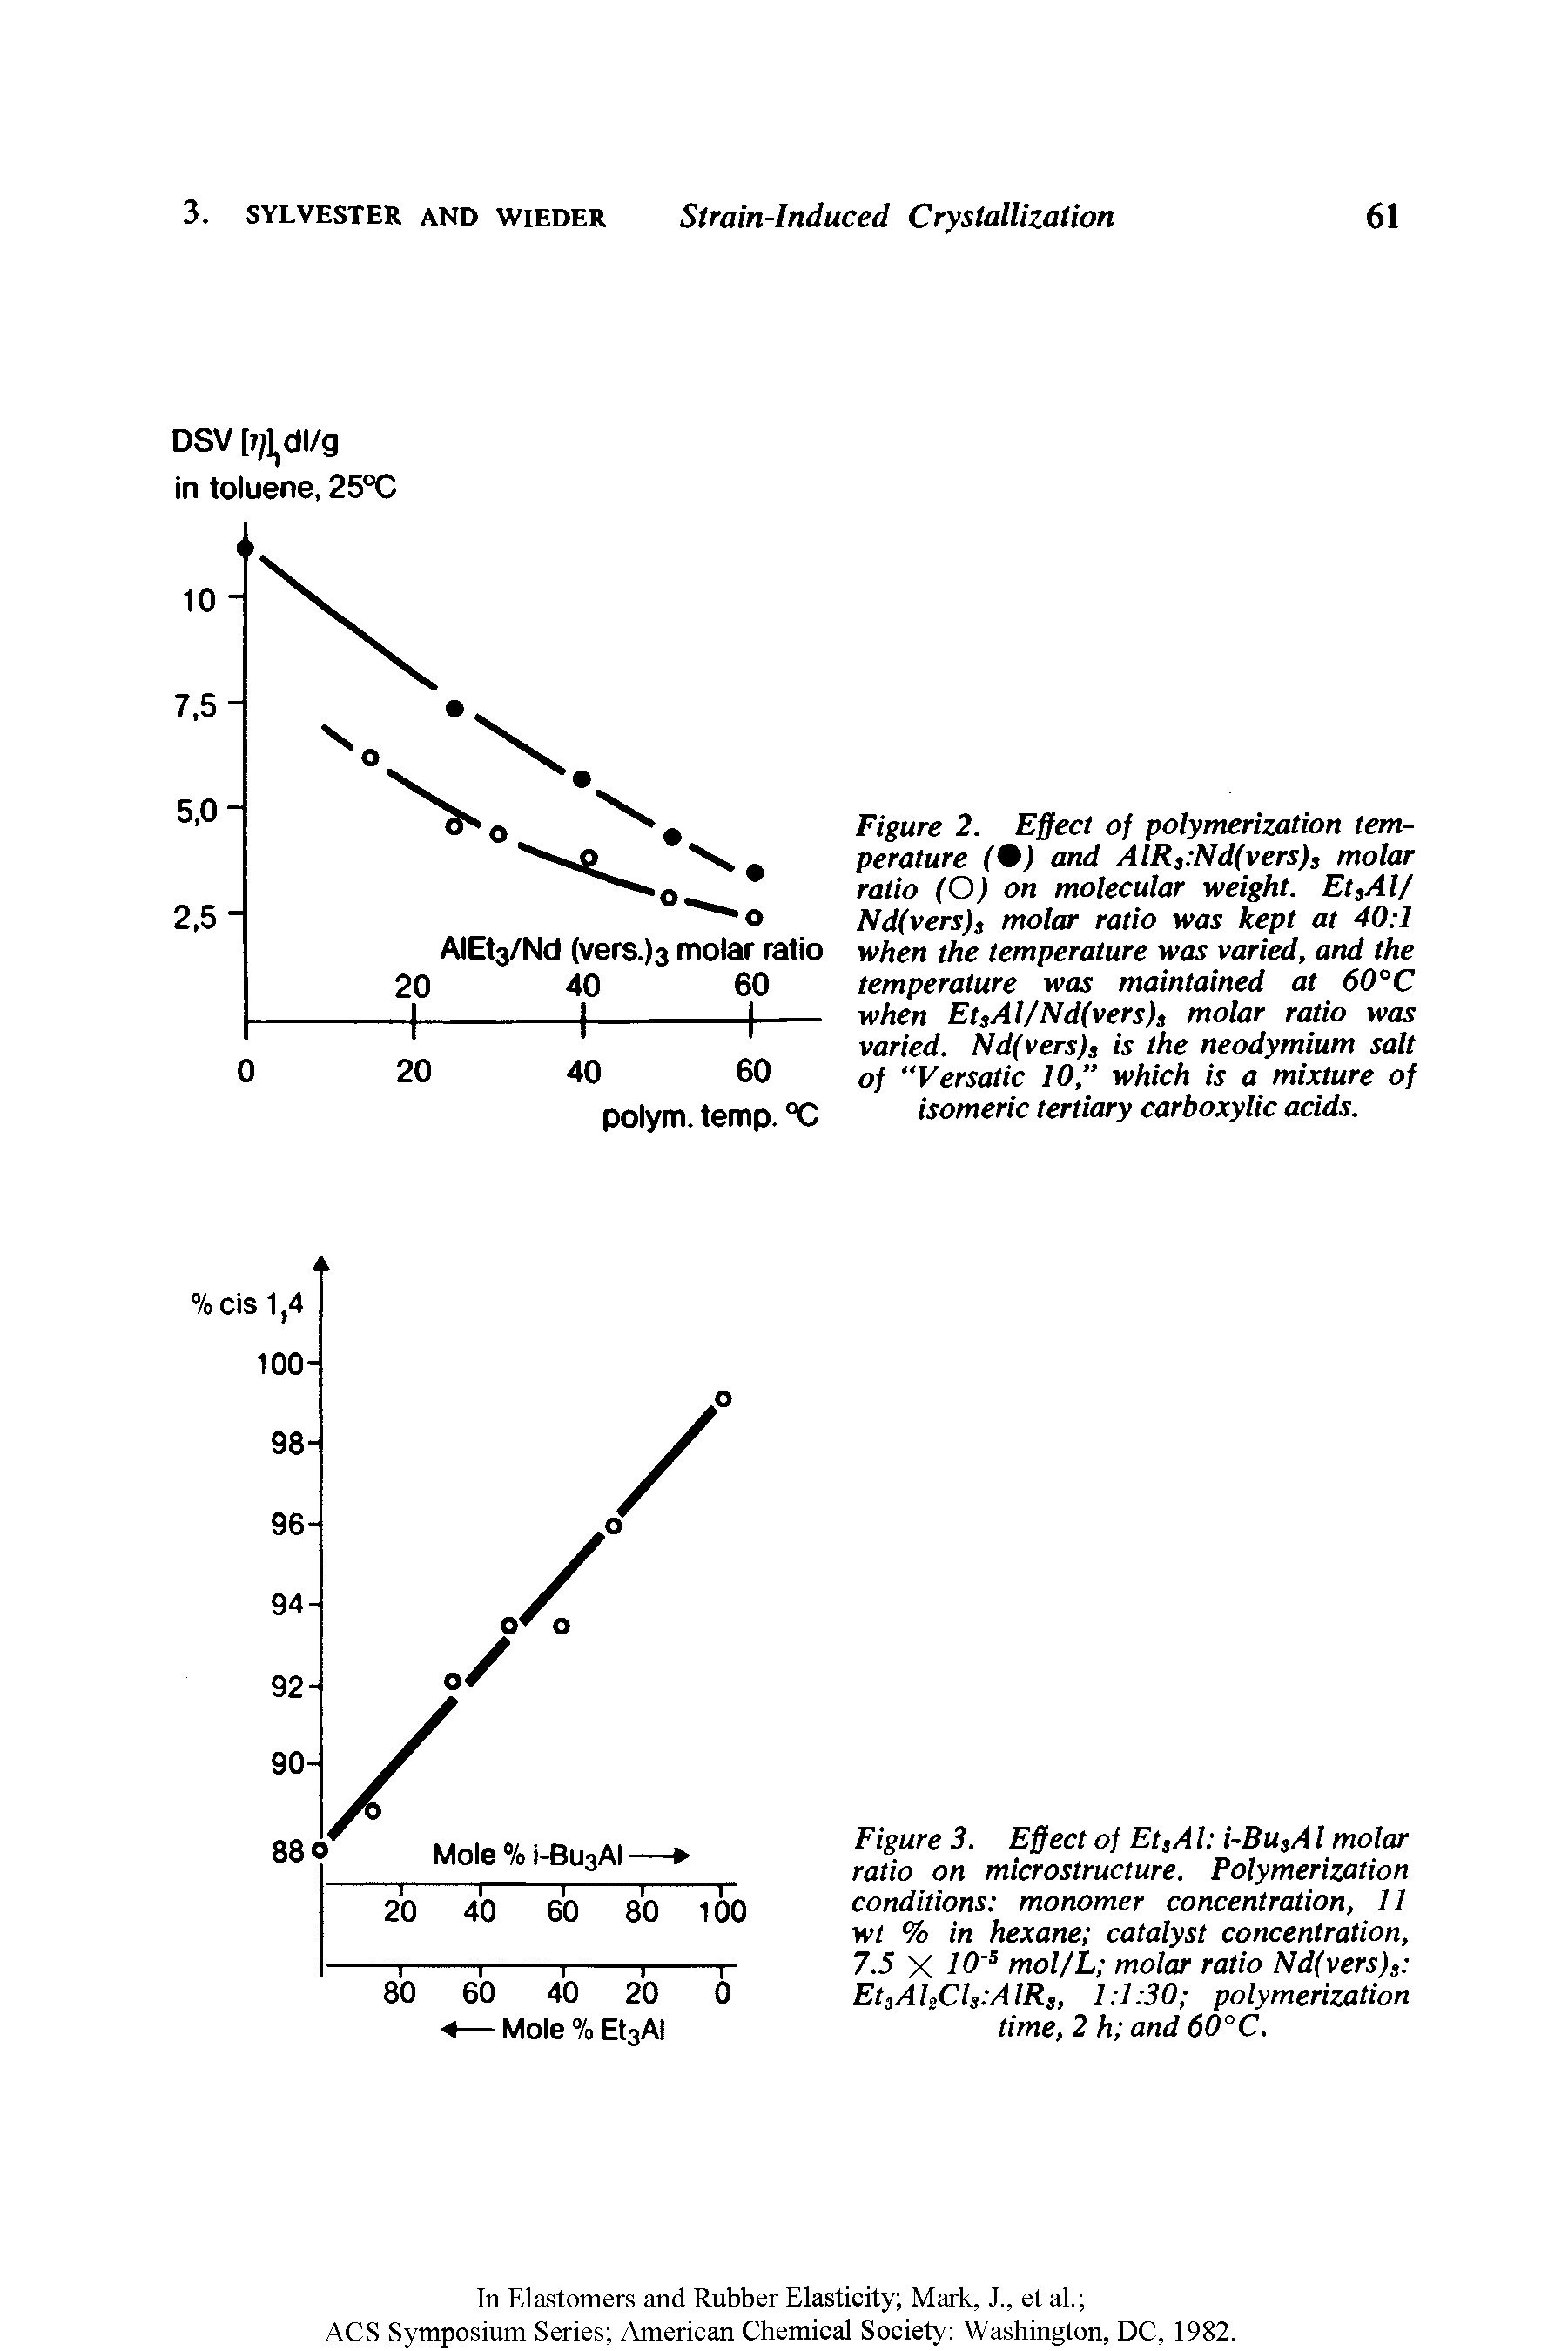 Figure 2. Effect of polymerization temperature (0) and AlR, Nd(vers), molar ratio (O) on molecular weight. Et,Al/ Ndivers), molar ratio was kept at 40 1 when the temperature was varied, and the temperature was maintained at 60°C when Et,Al/Nd(vers), molar ratio was varied. Nd(vers), is the neodymium salt of Versatic 10, which is a mixture of isomeric tertiary carboxylic acids.